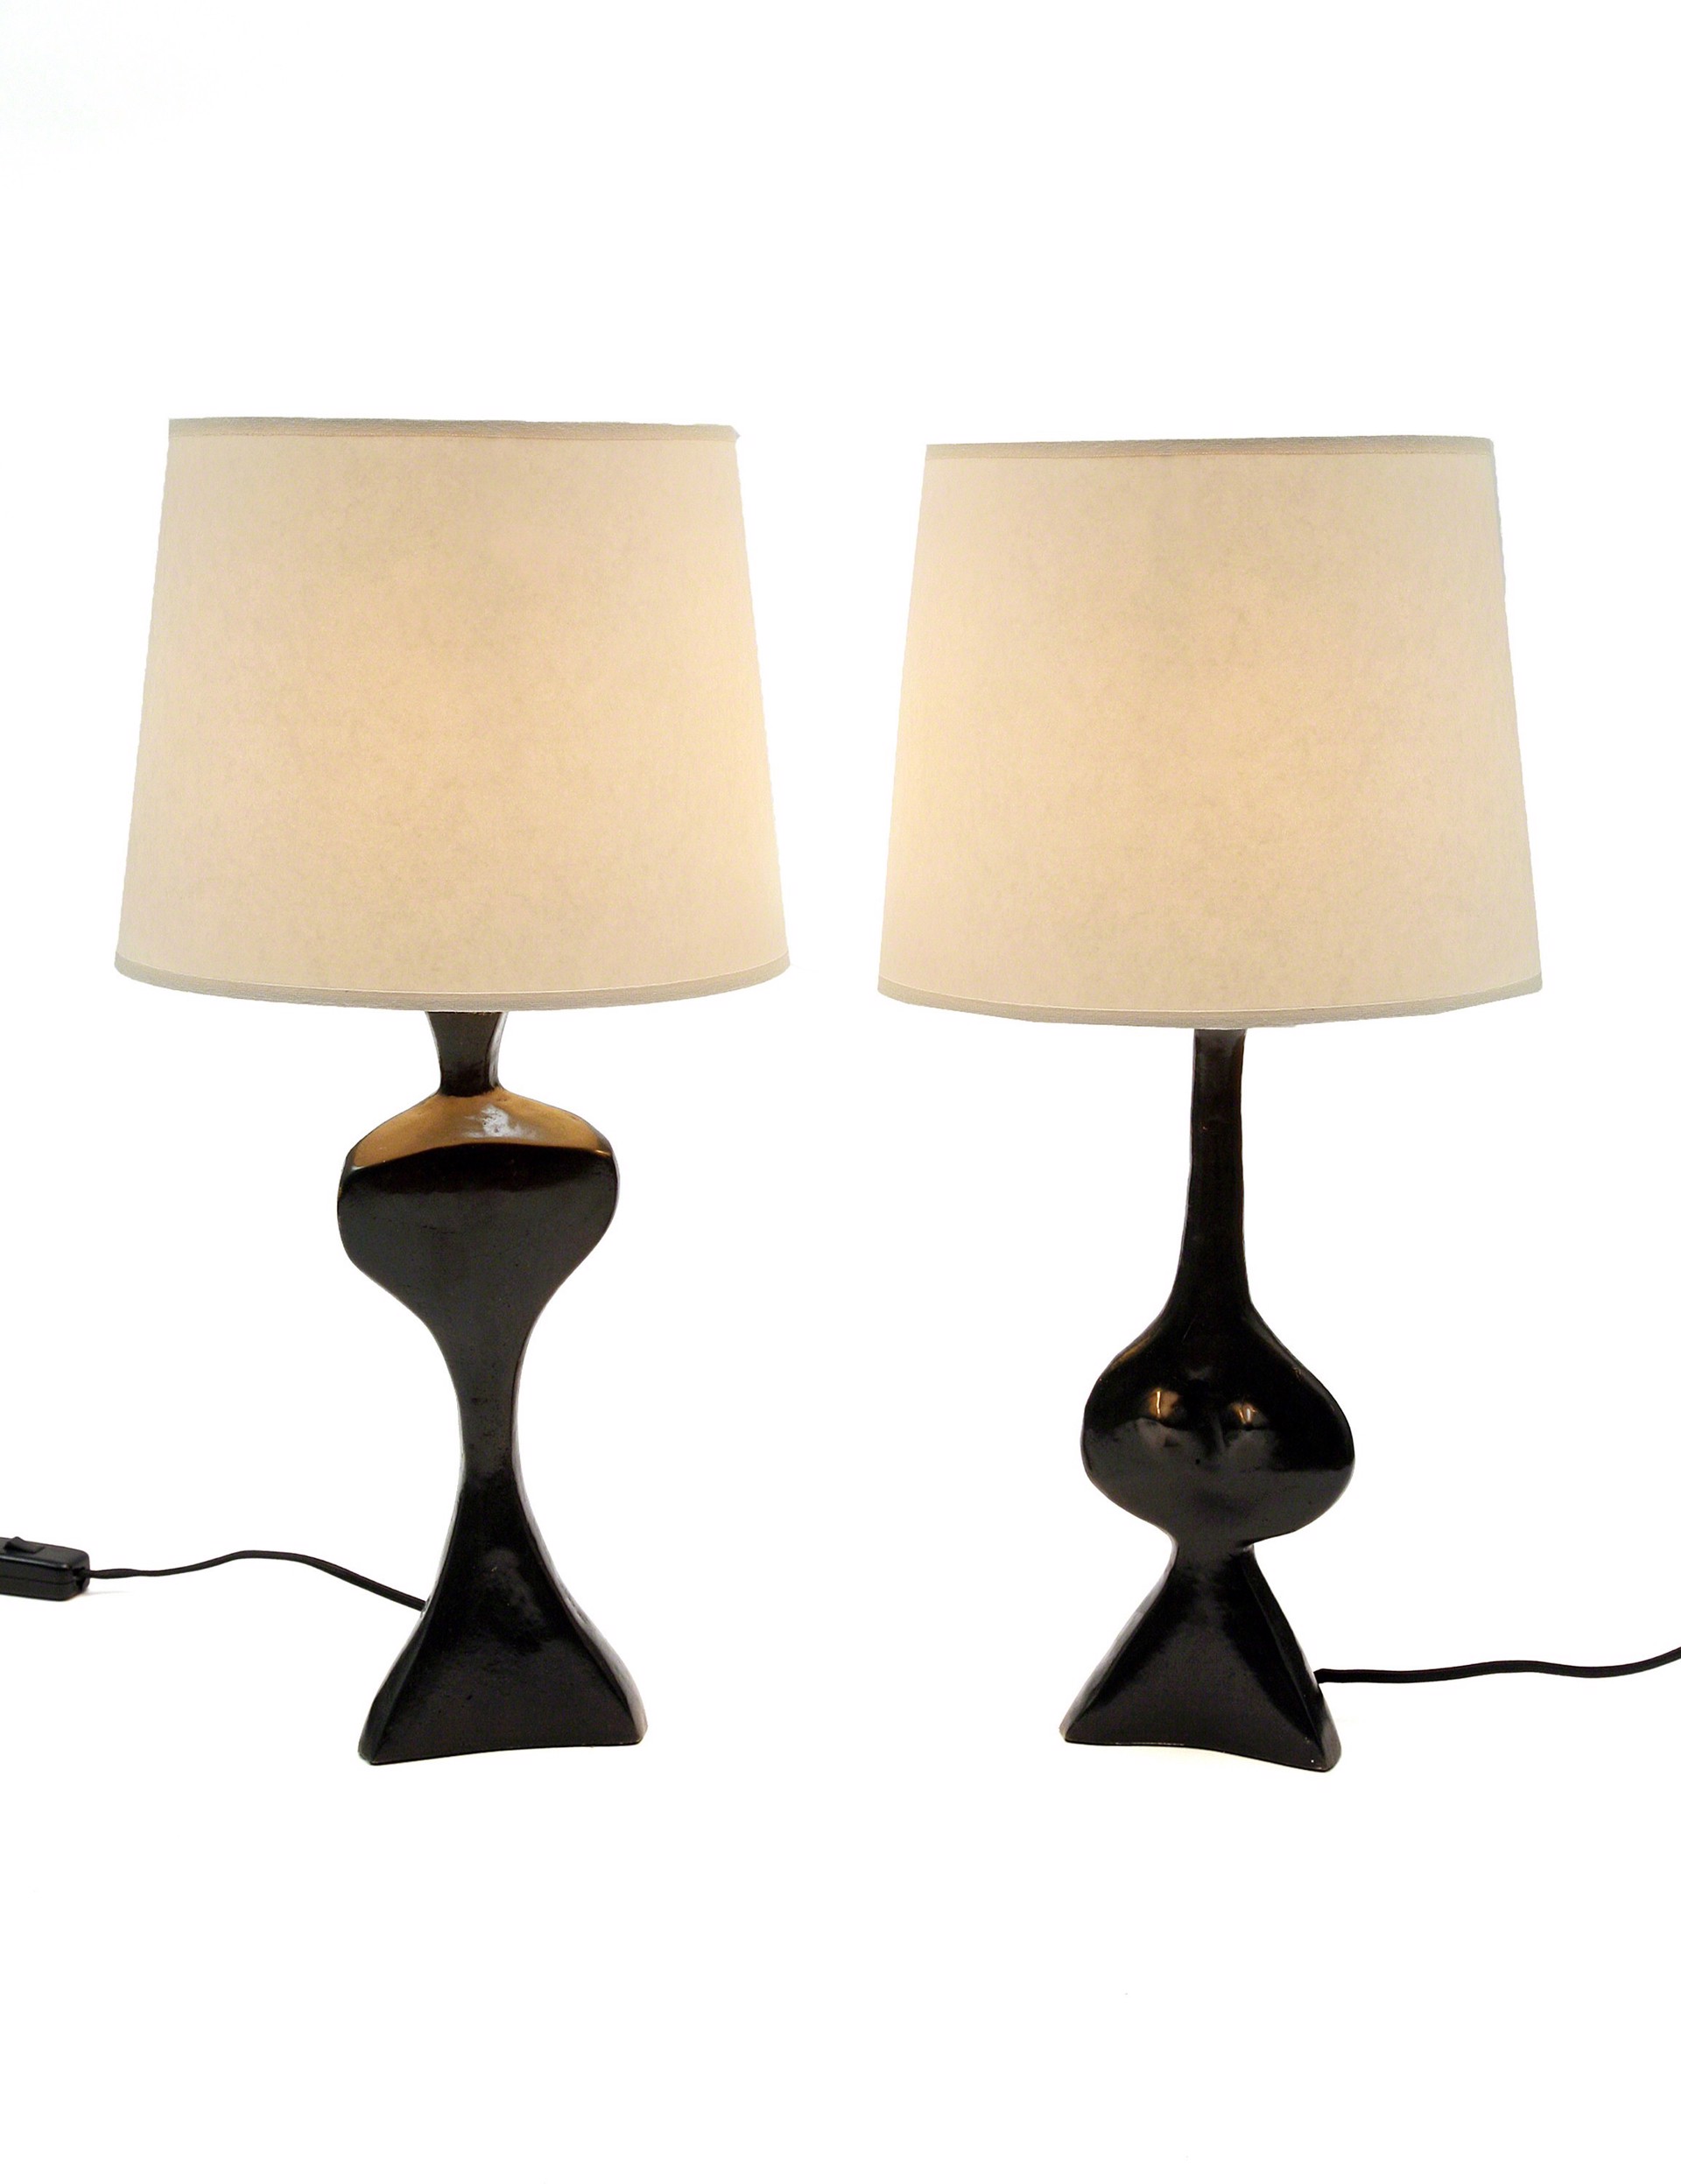 "Adam and Eve" Lamps by Jacques Jarrige